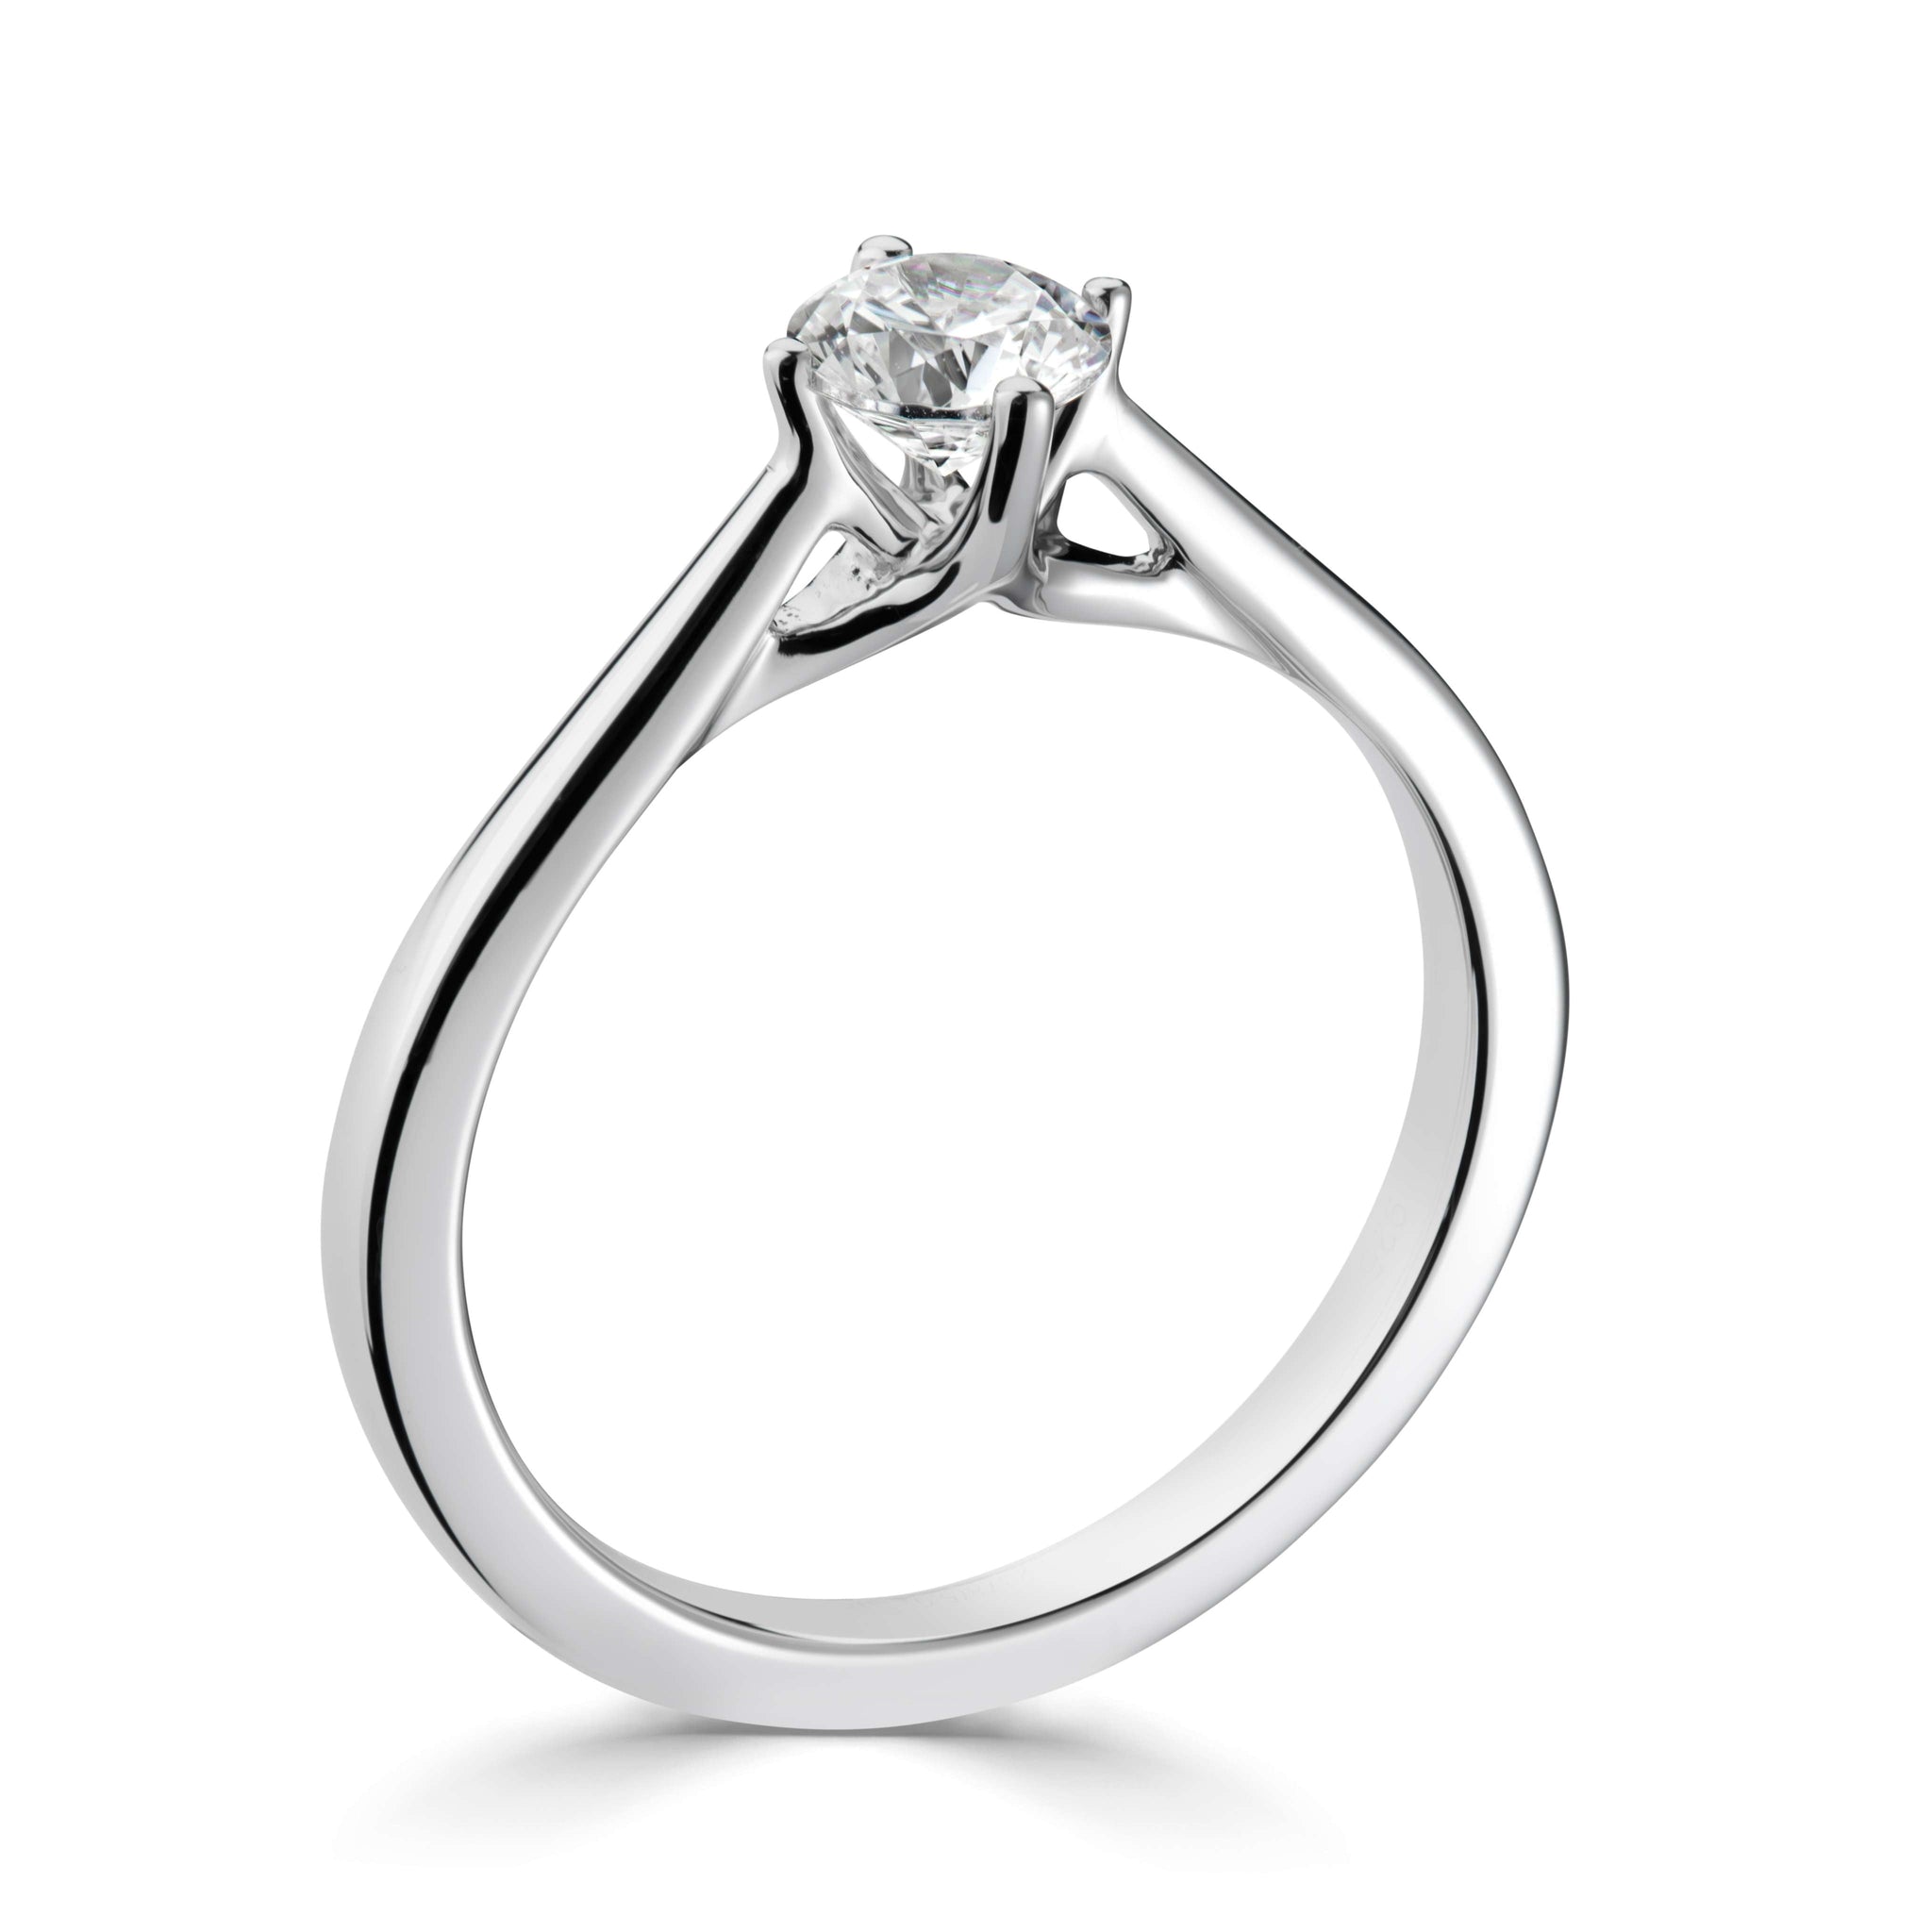 Aspen *Select a Round Diamond 0.25ct or above